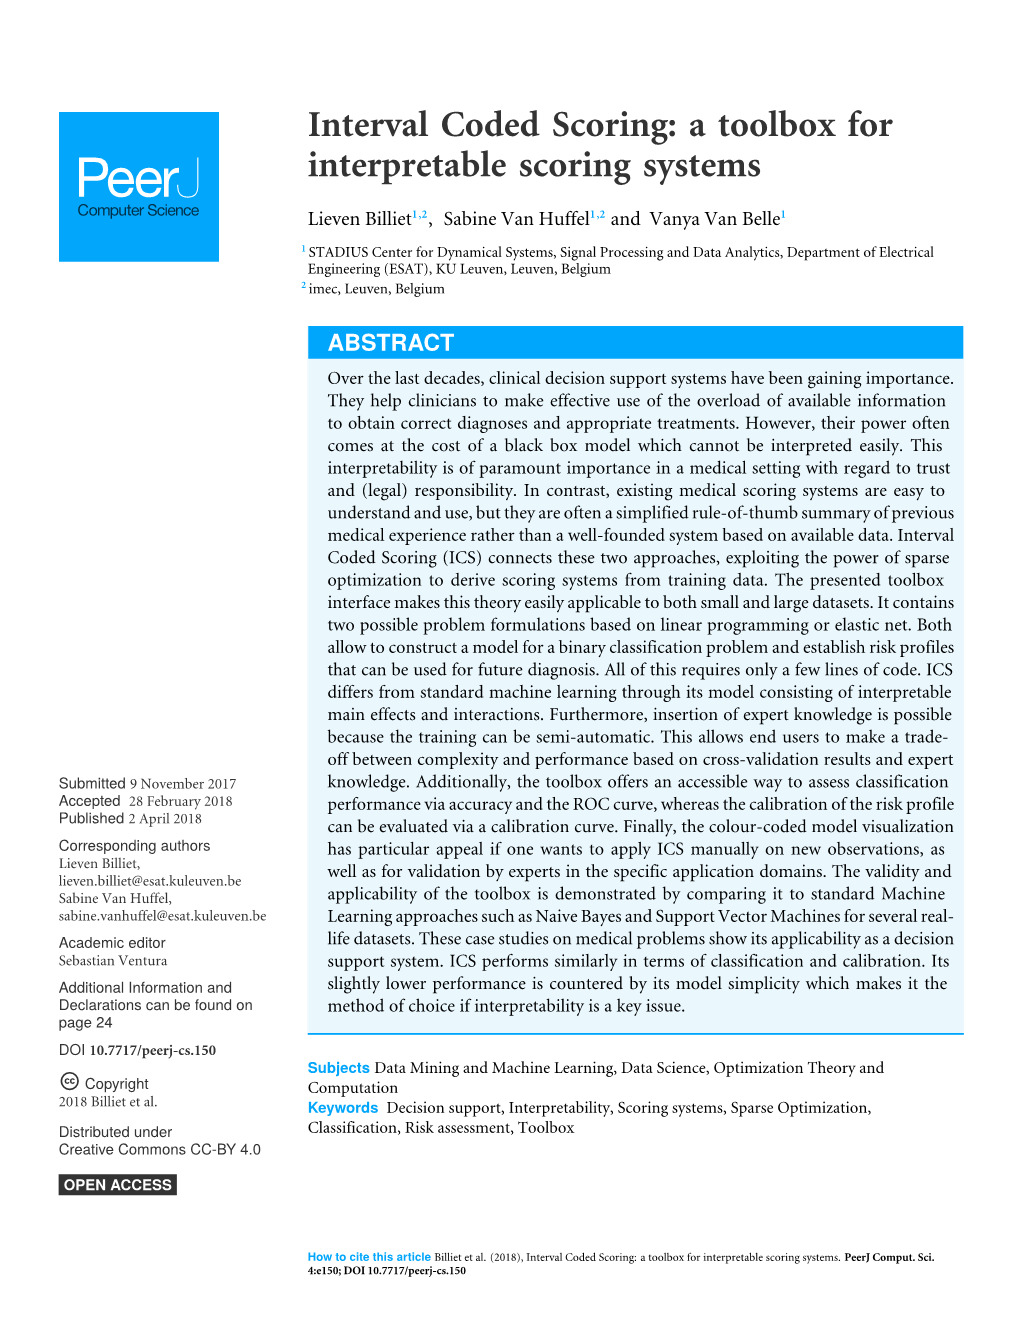 Interval Coded Scoring: a Toolbox for Interpretable Scoring Systems